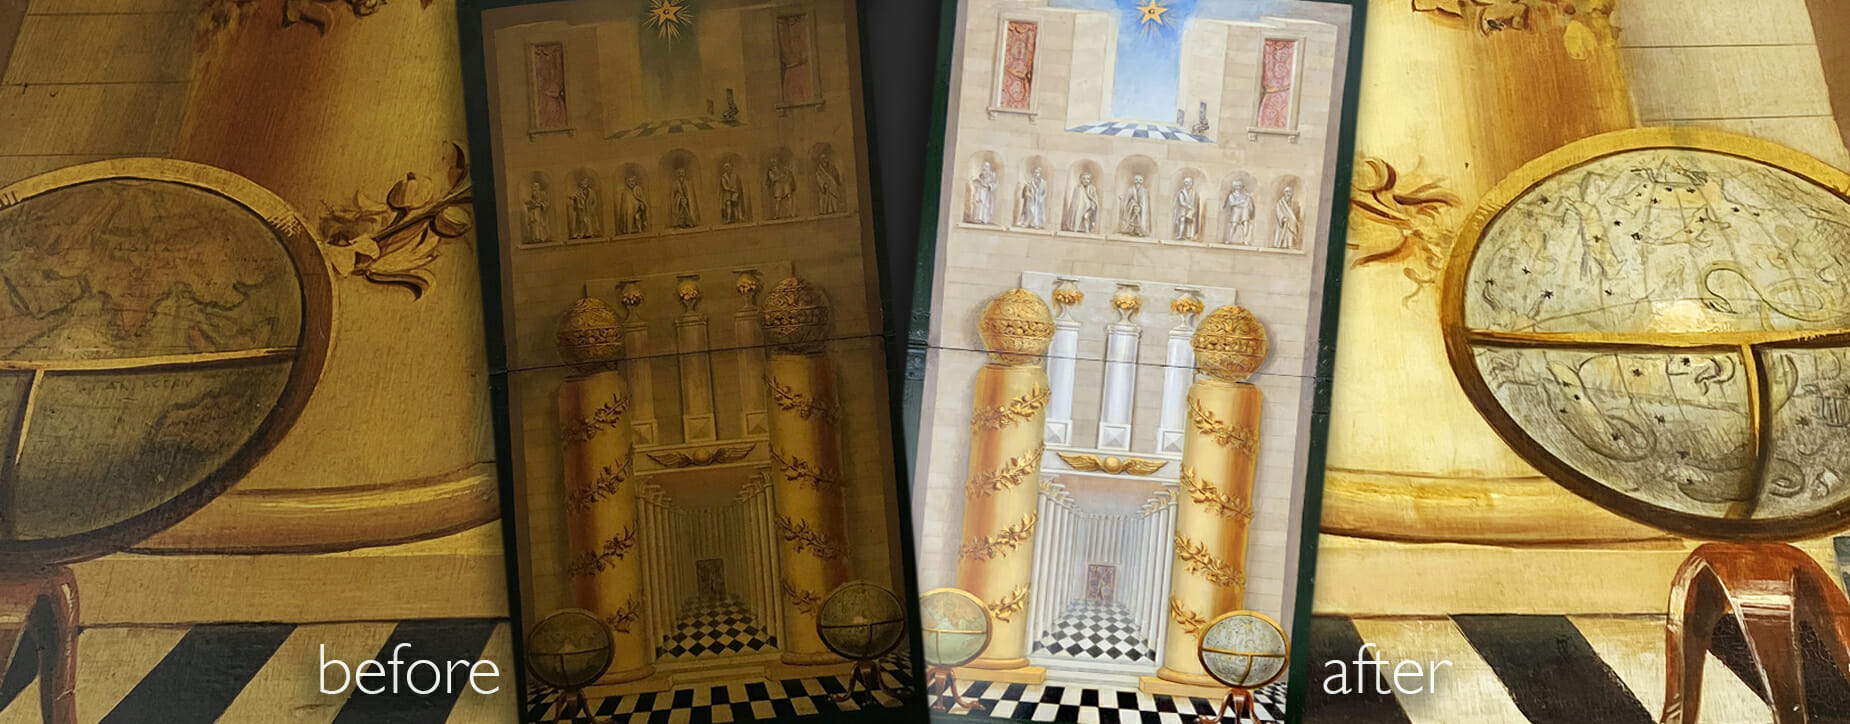 Before after restoration masonic tracing board examples